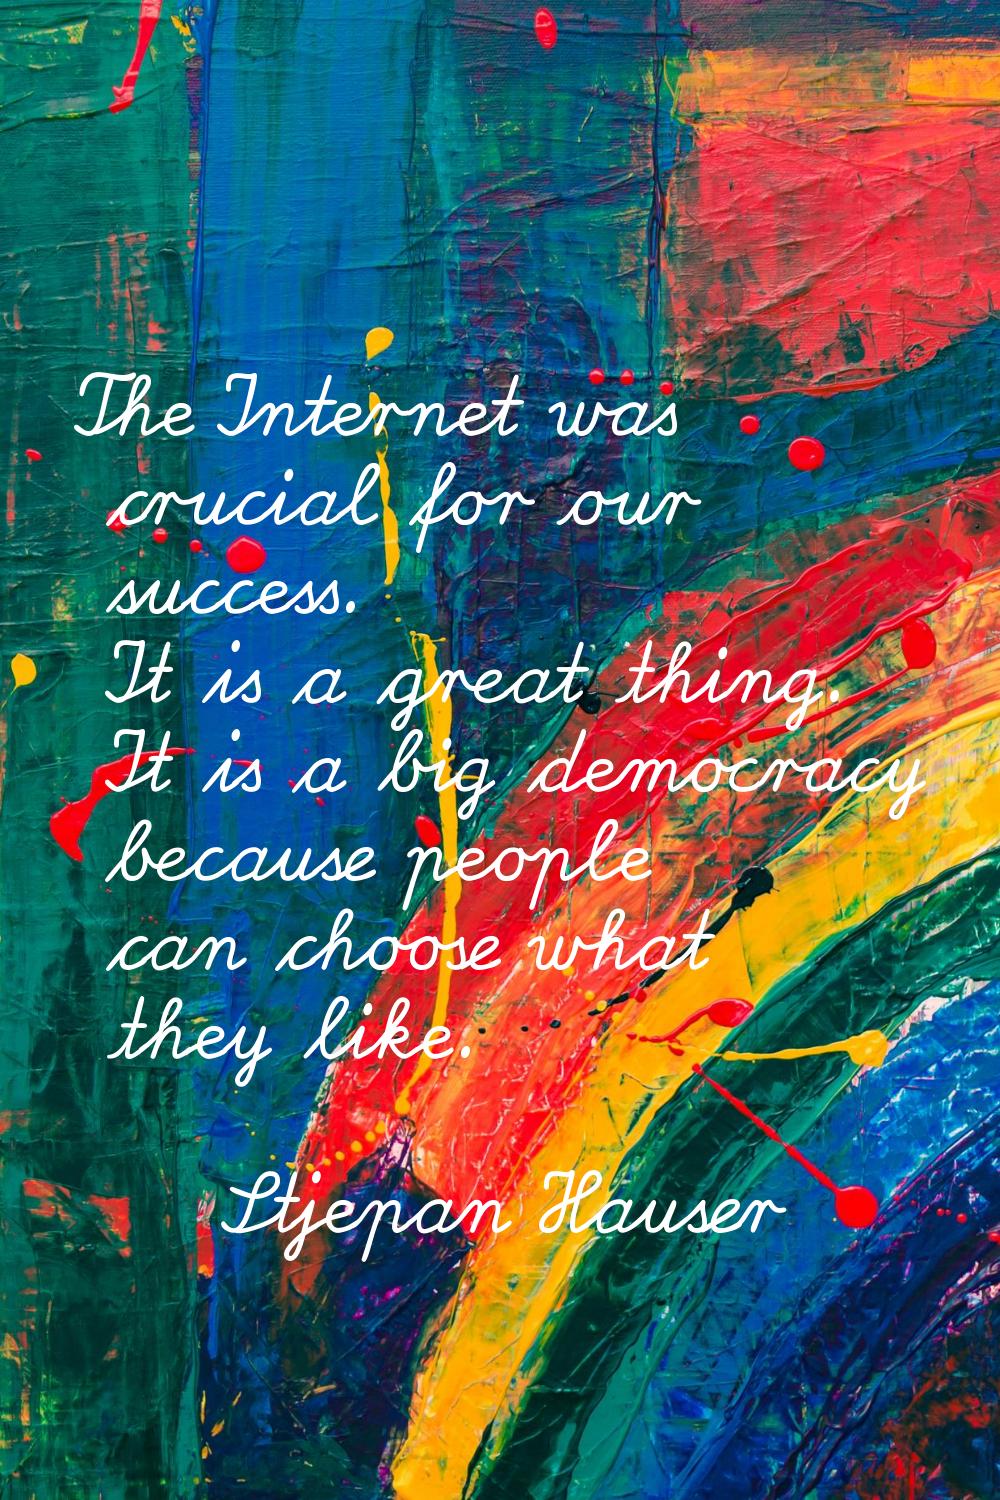 The Internet was crucial for our success. It is a great thing. It is a big democracy because people